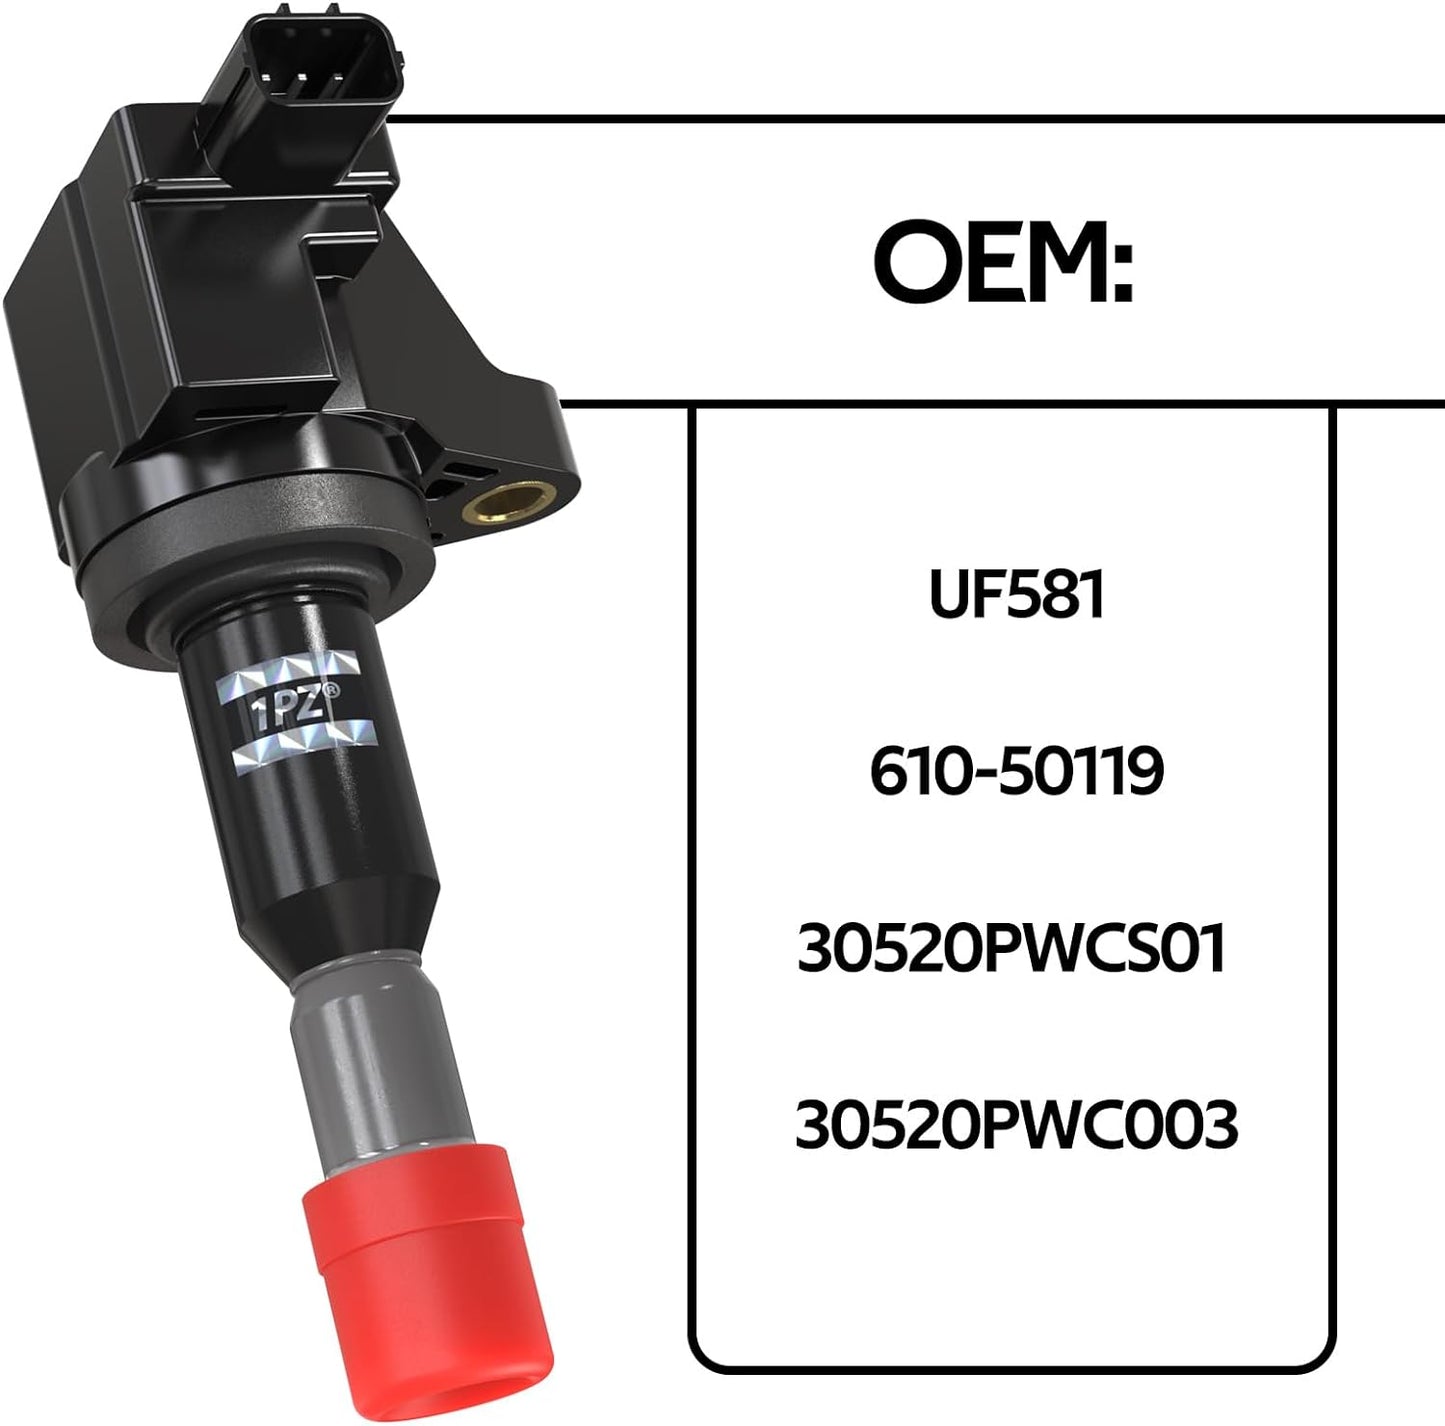 1PZ HE5-K81 Set of 4 Ignition Coil Pack Replacement for Honda Fit Hatchback 2007 2008 1.5L L4 UF581 5C1635 C1578 E1081 30520PWC003 610-50119 30520PWCS01 30520-PWC-S01 30520-PWC-003